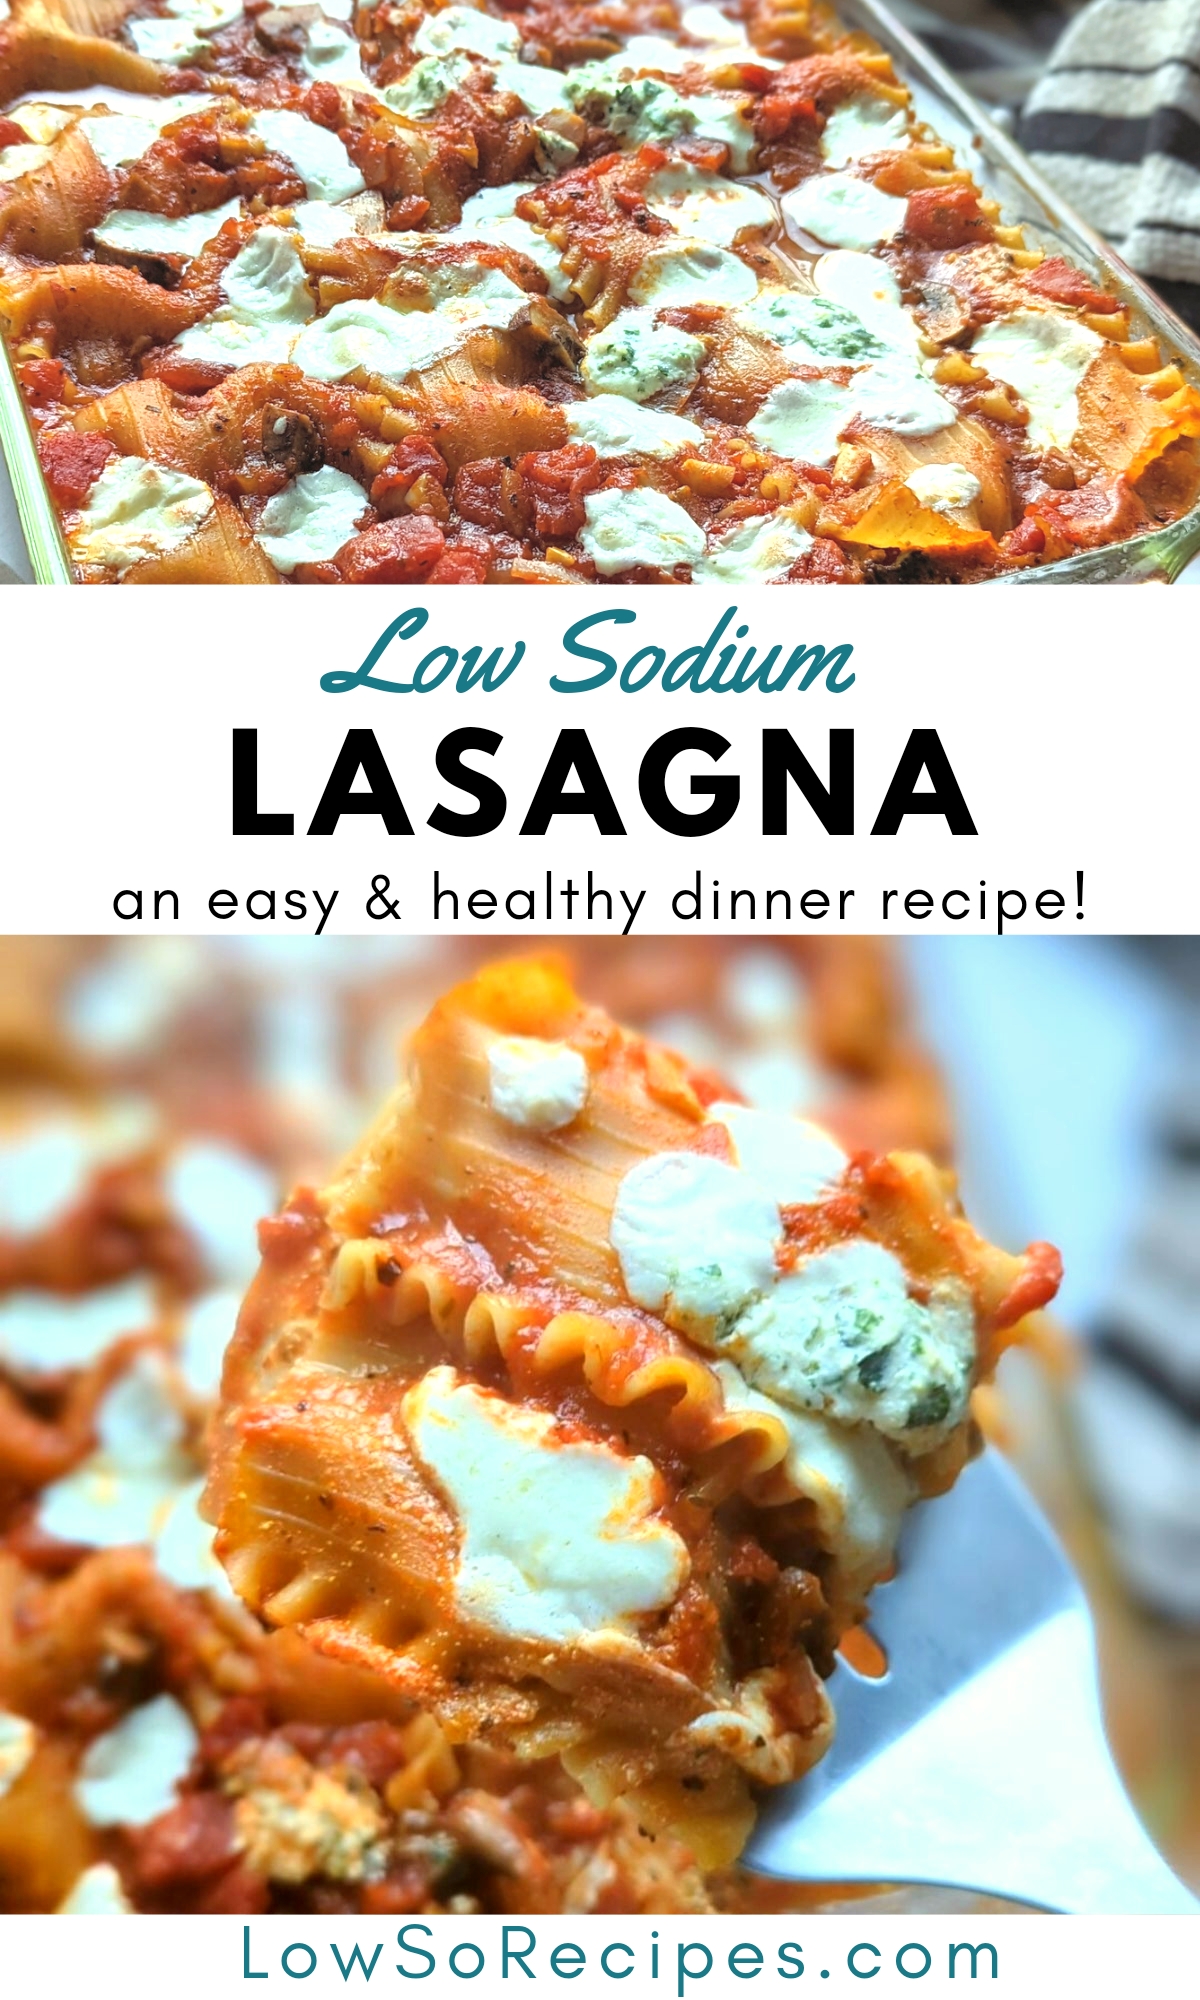 low sodium lasagna recipe with fresh mozzarella and ricotta cheese and ready baked lasagna noodles no added salt